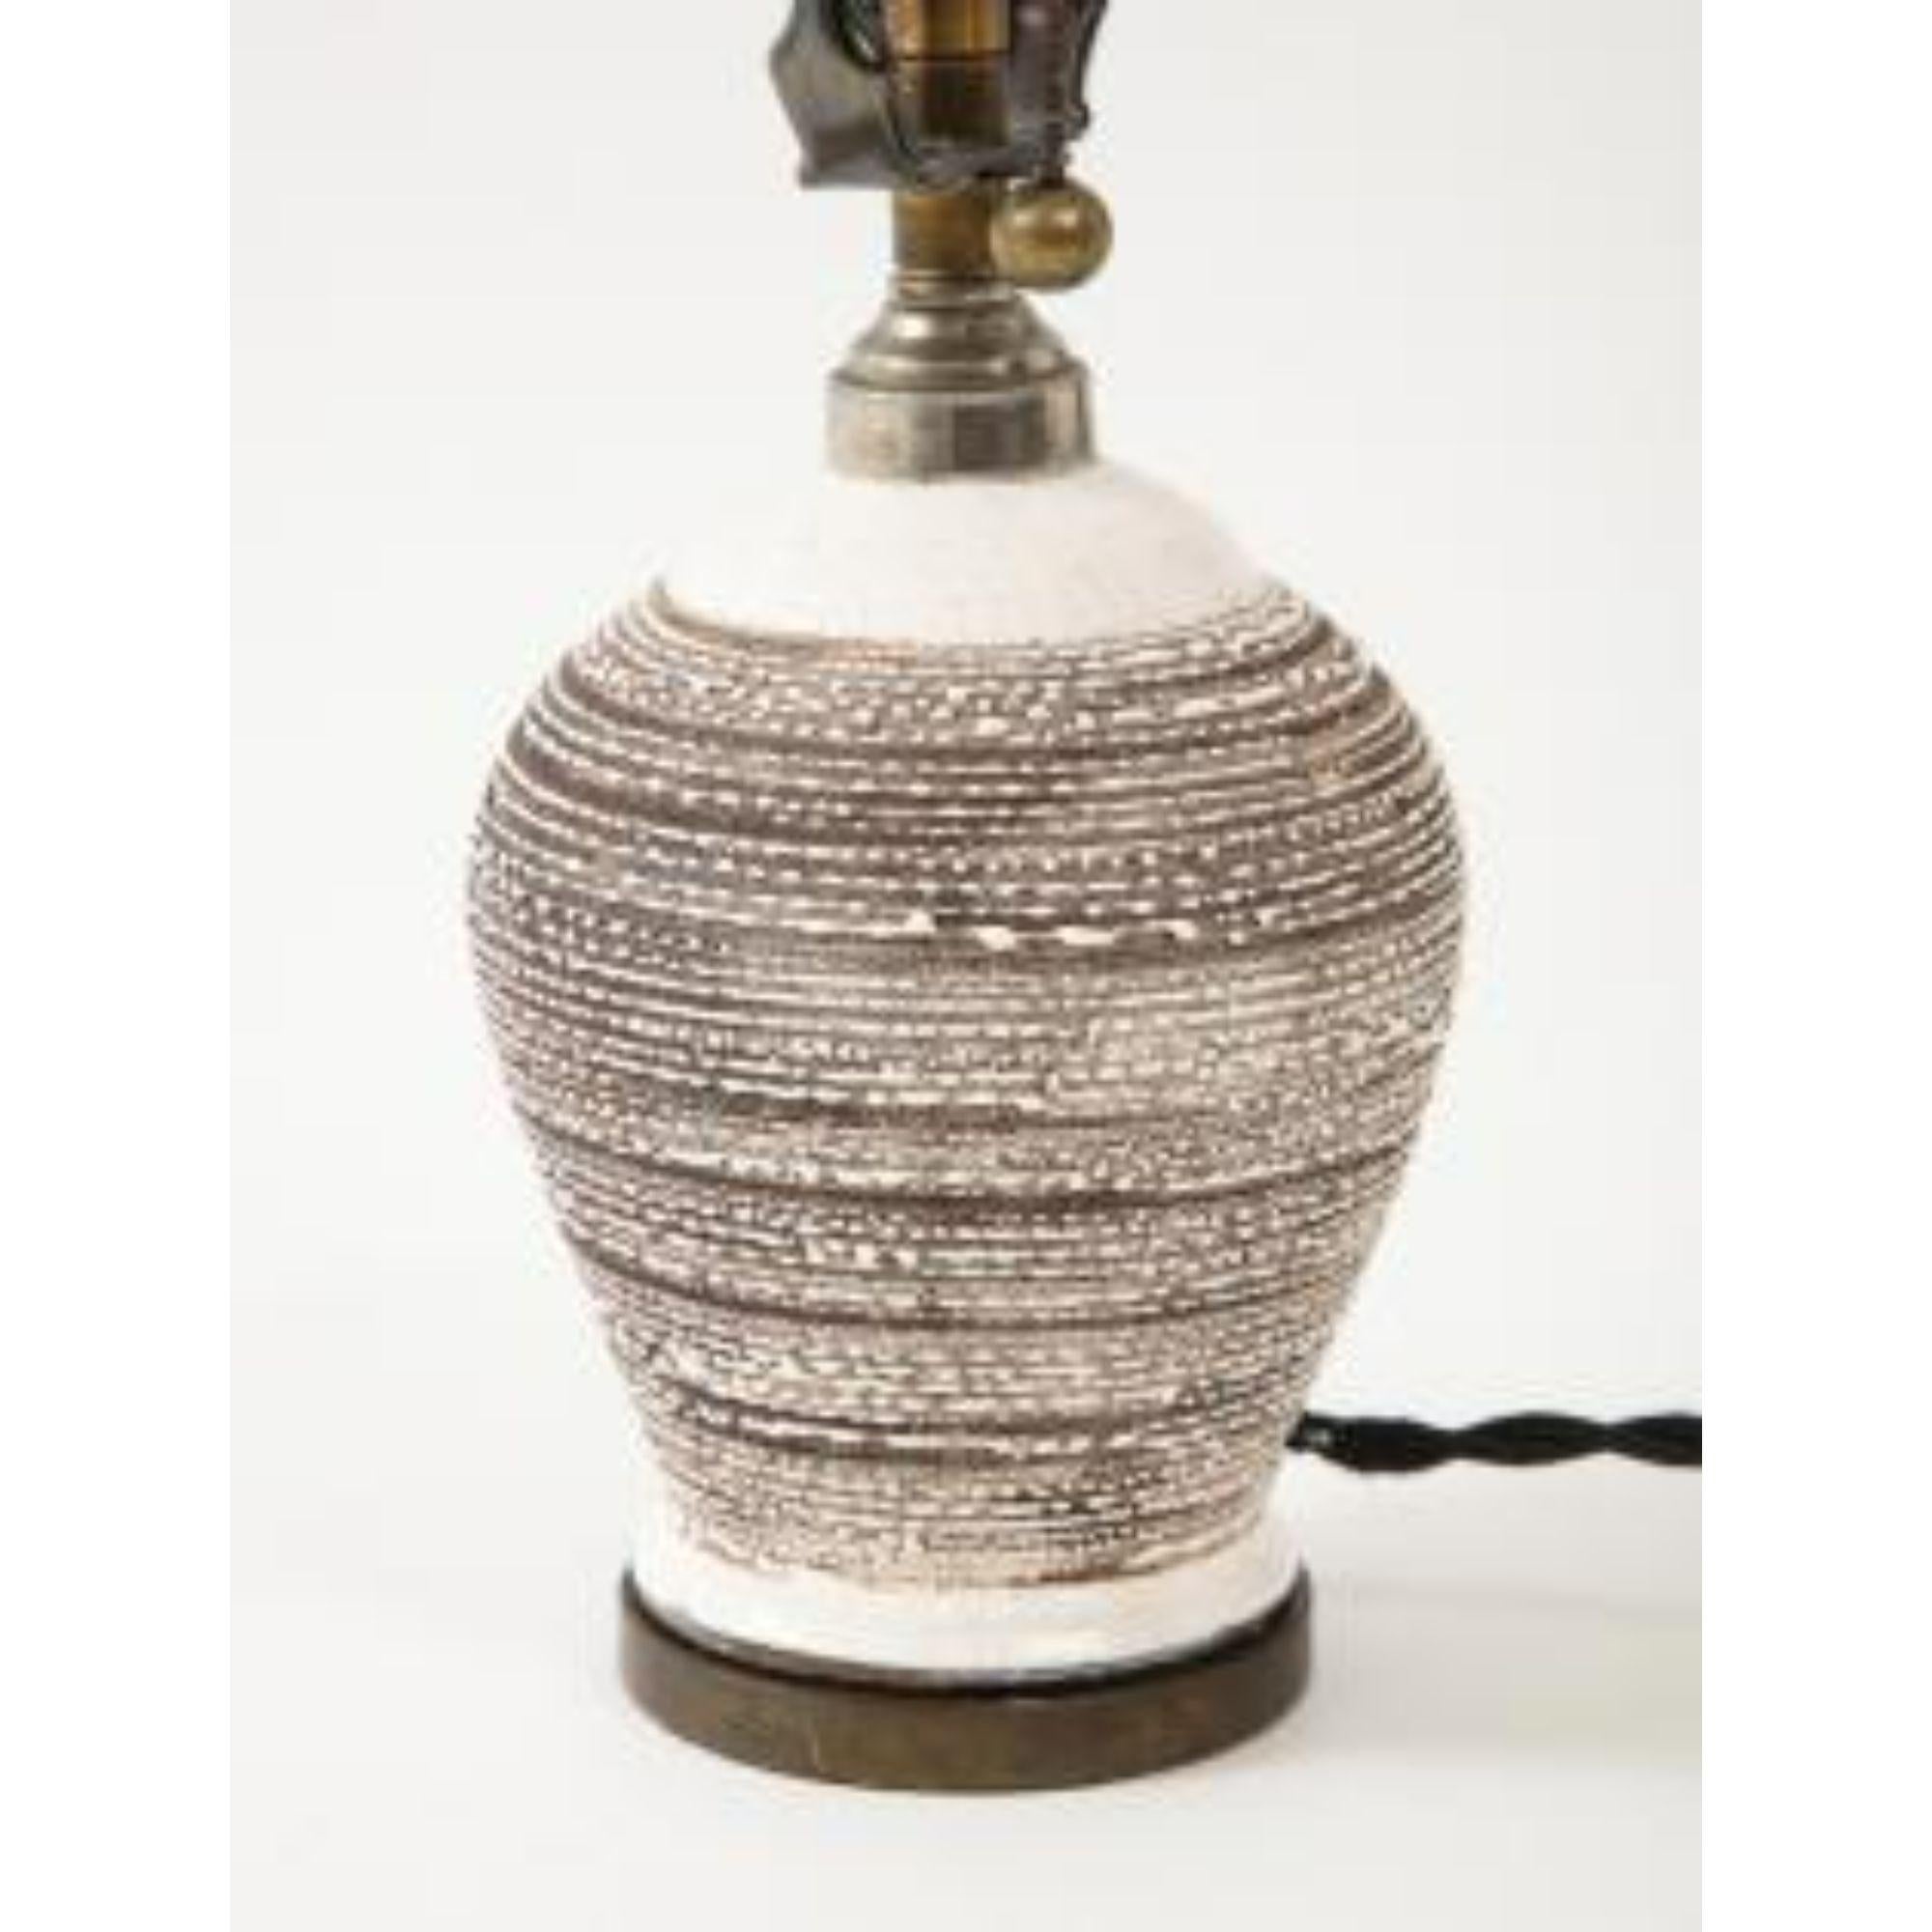 Brown/White Textured Glazed Ceramic & Bronze Table Lamp, 20th Century For Sale 2